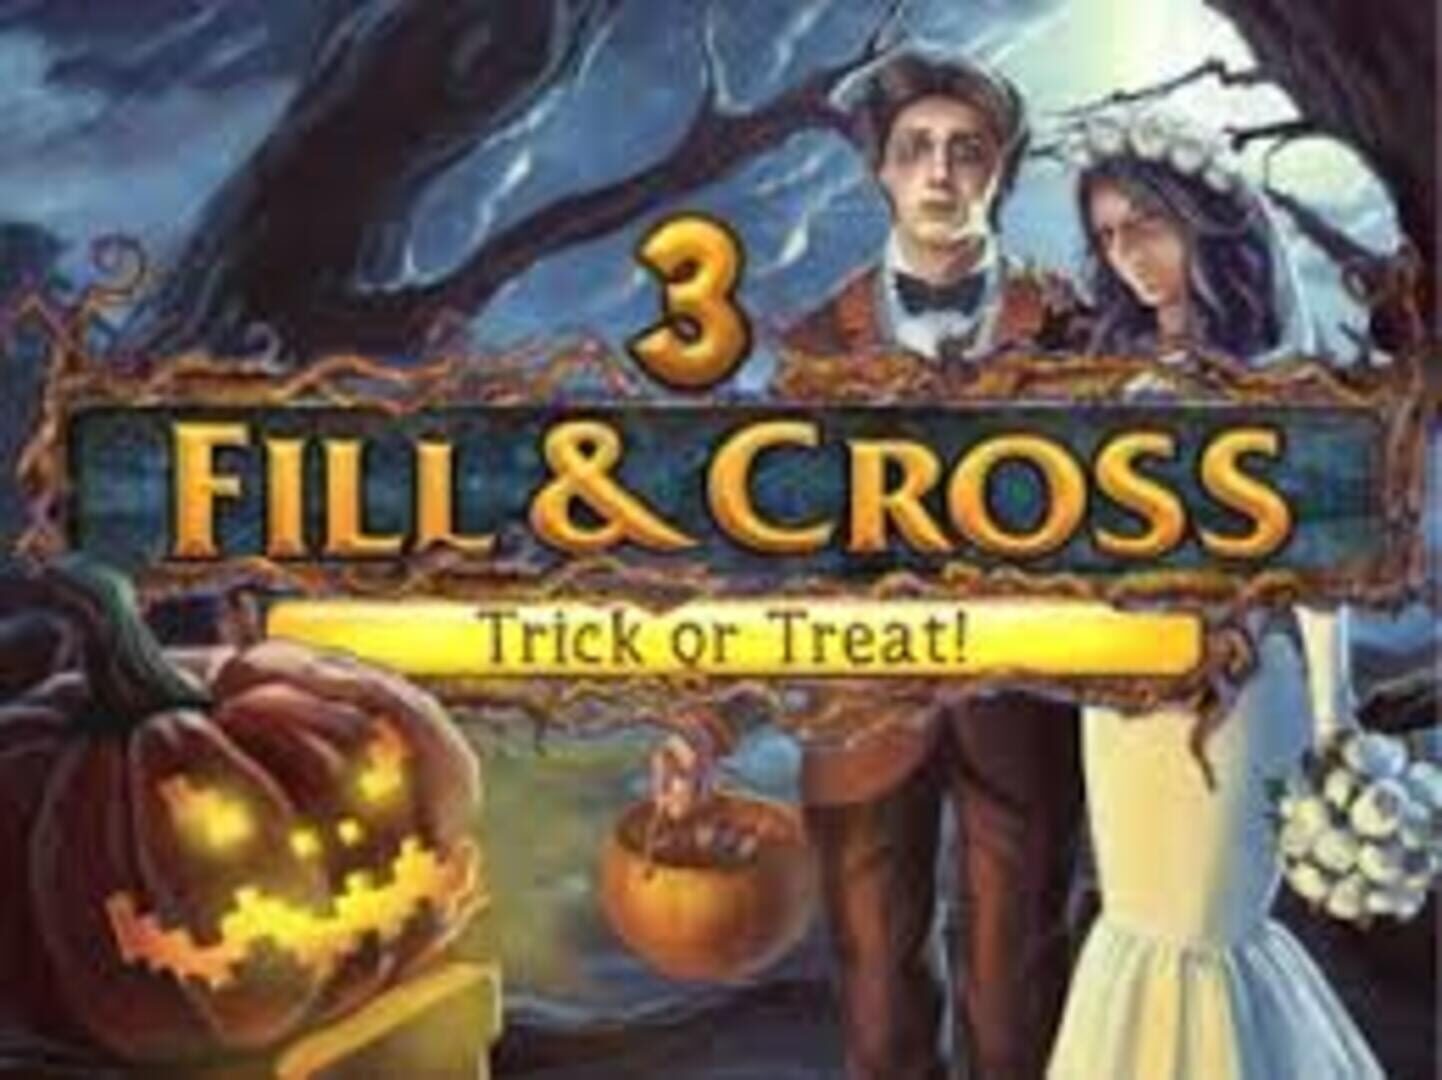 Fill and Cross. Trick or Treat 3!